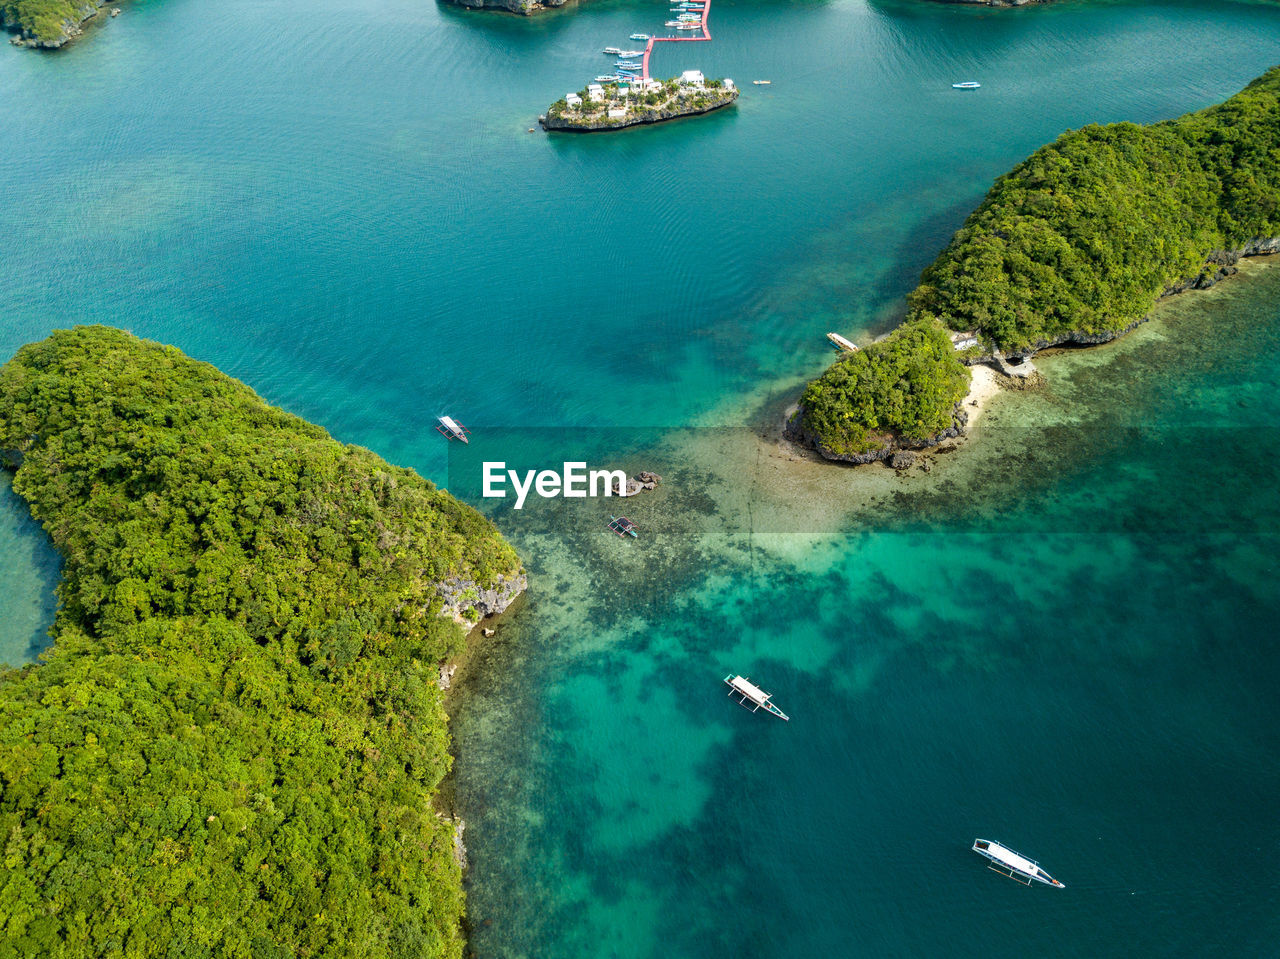 Scenic panorama drone aerial picture of the hundred islands national park in pangasinan, philippines